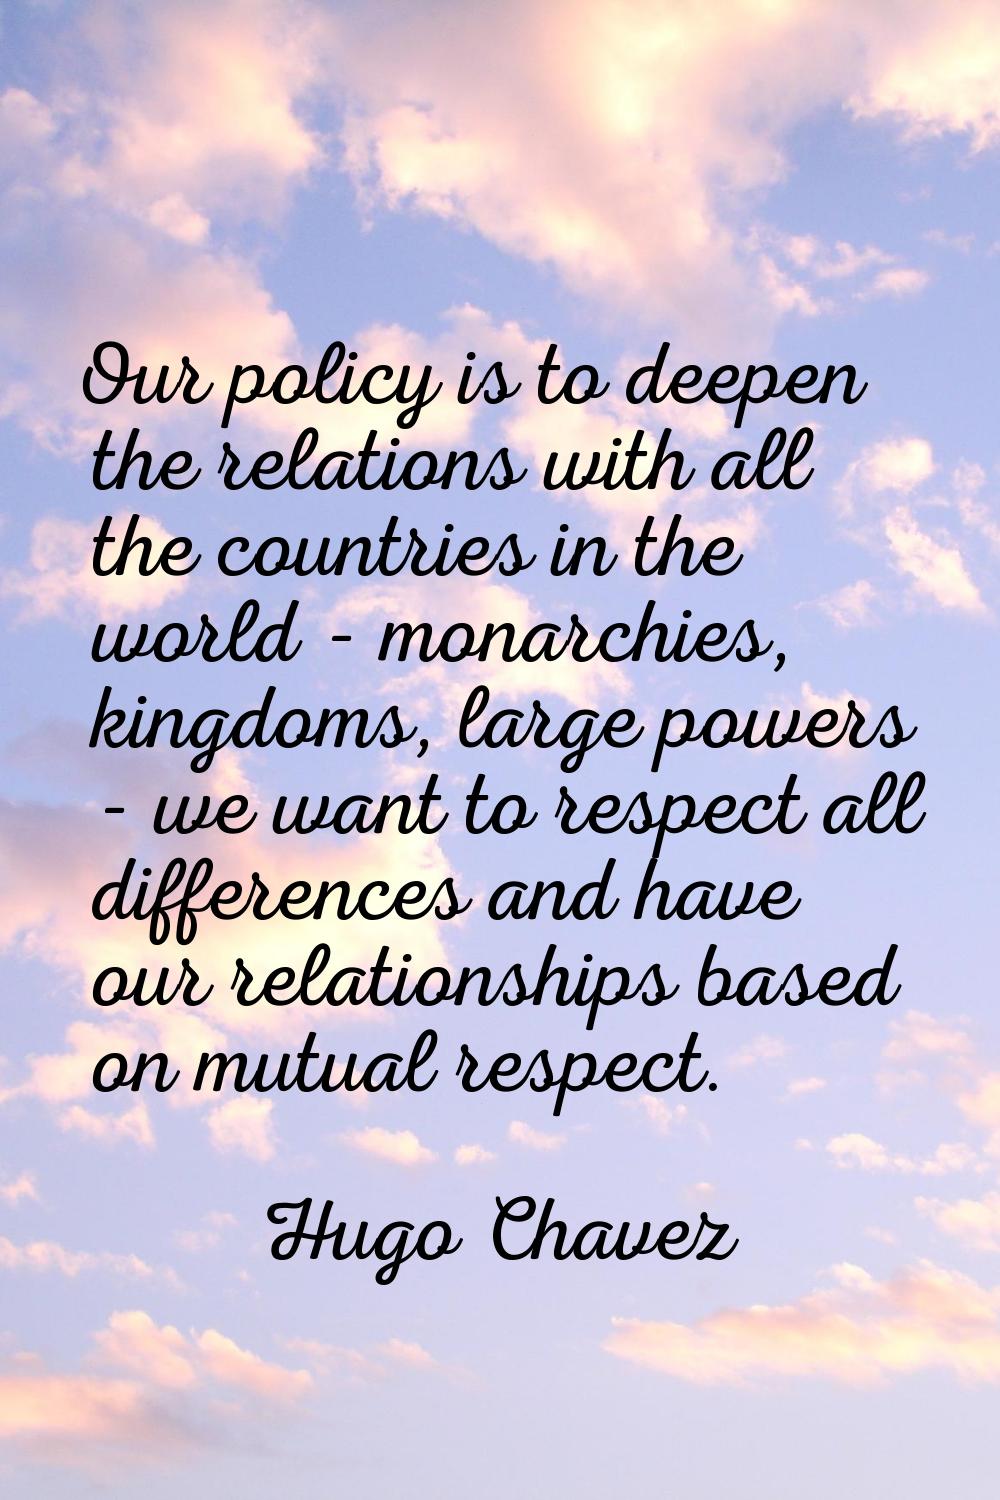 Our policy is to deepen the relations with all the countries in the world - monarchies, kingdoms, l